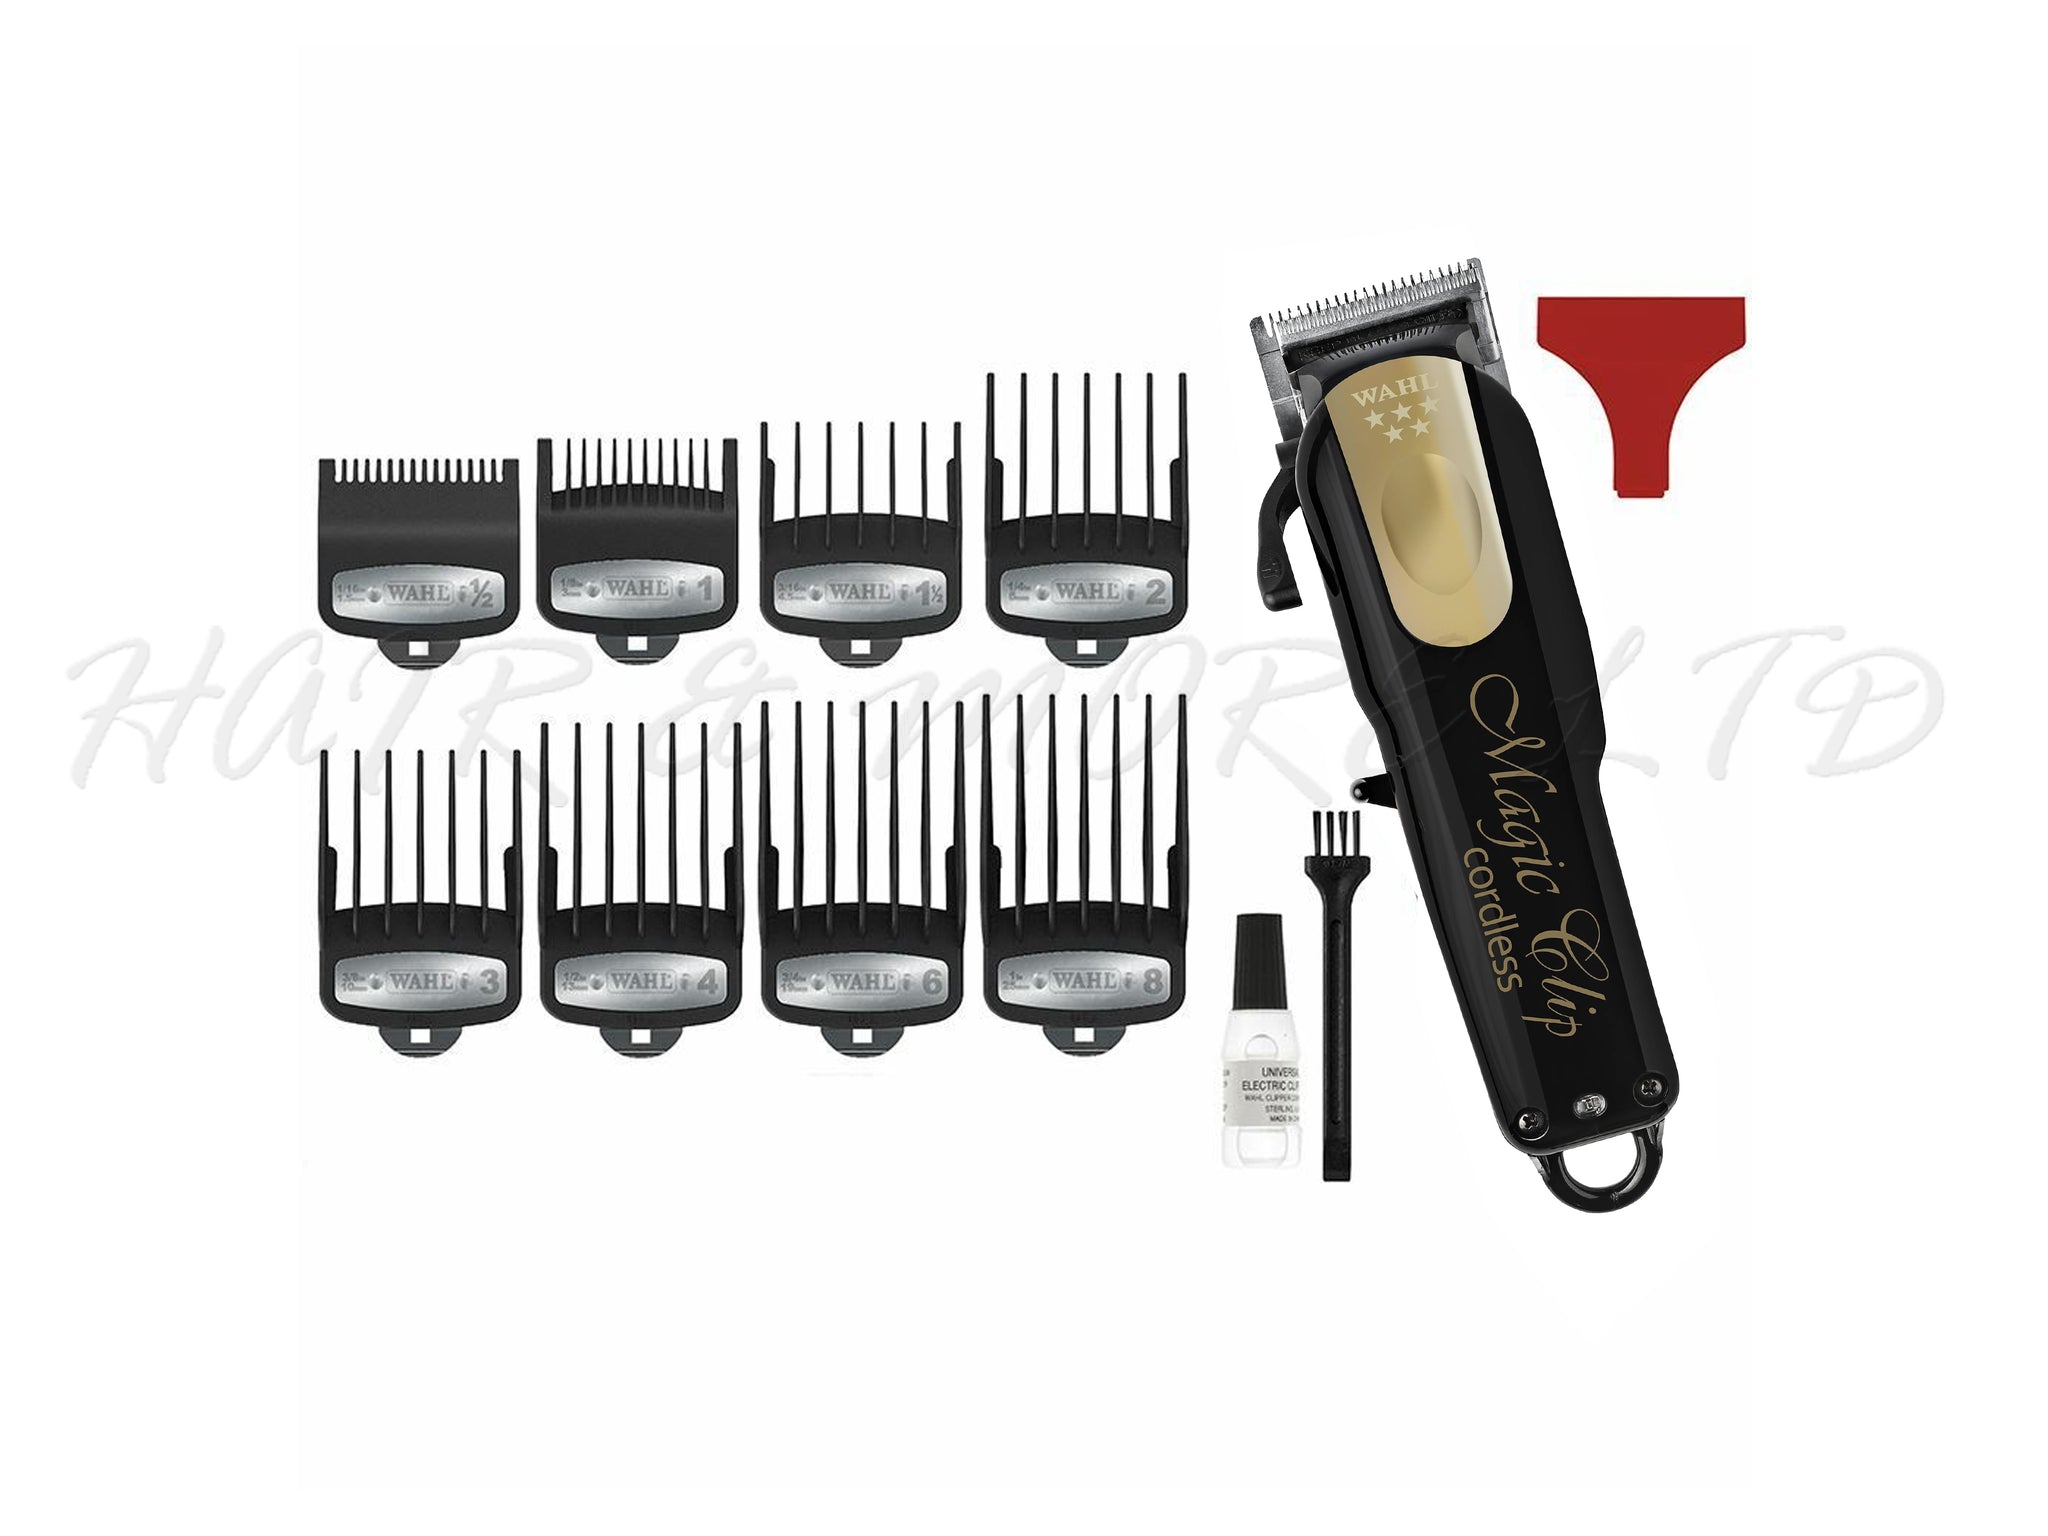 WAHL Professional 5 Star Cordless Magic Clip Clipper with Combs